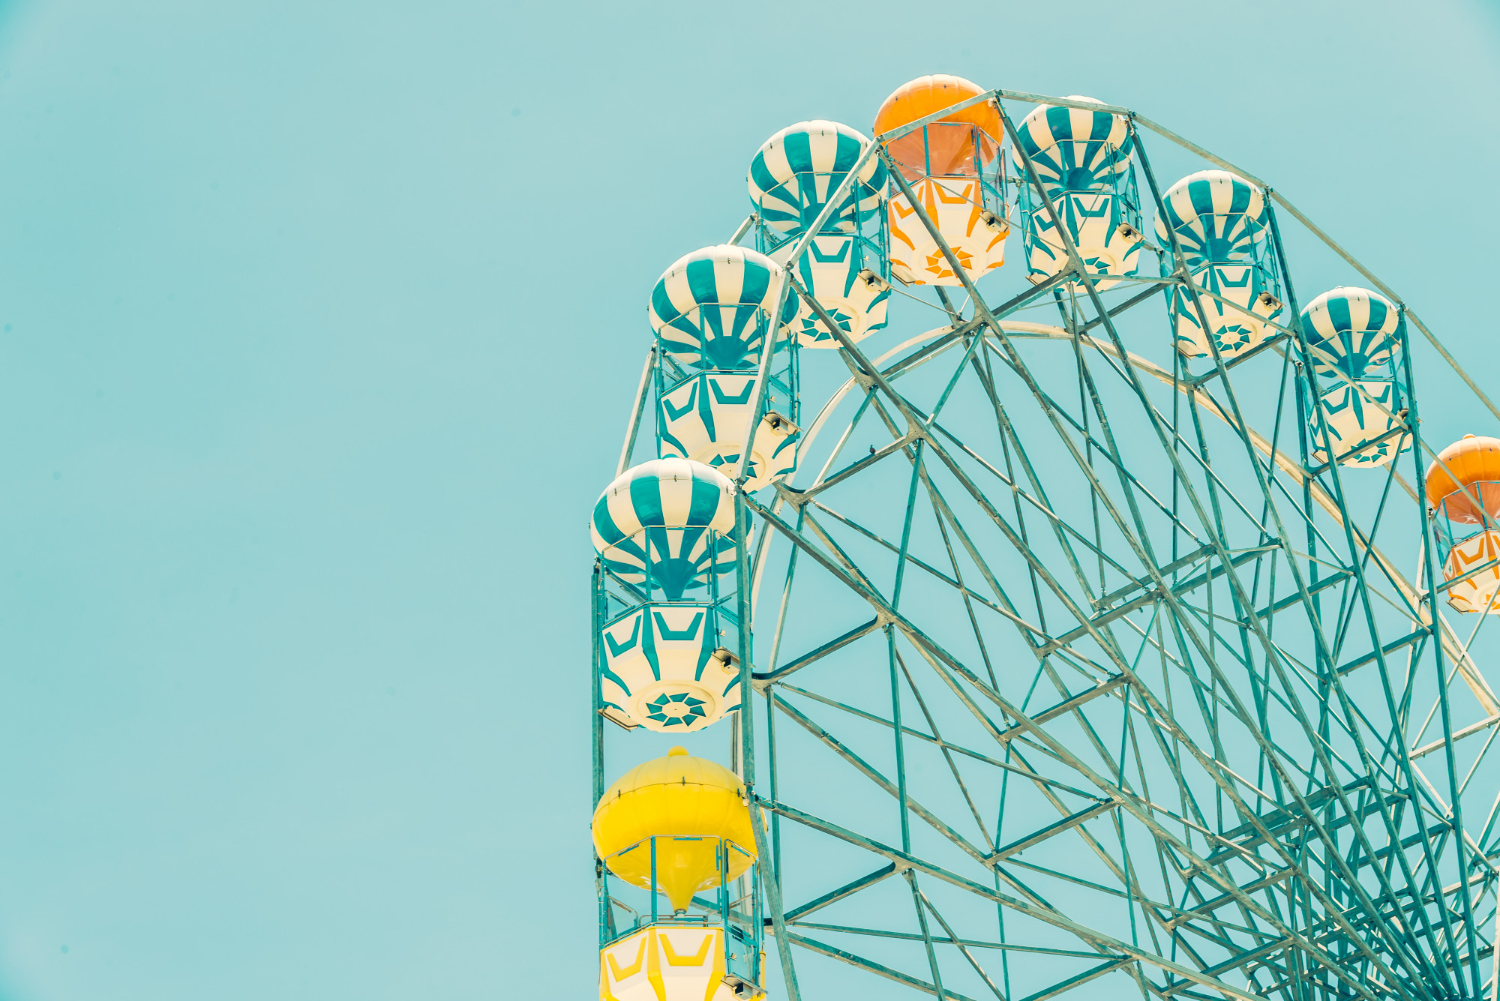 Vintage ferris wheel at an event